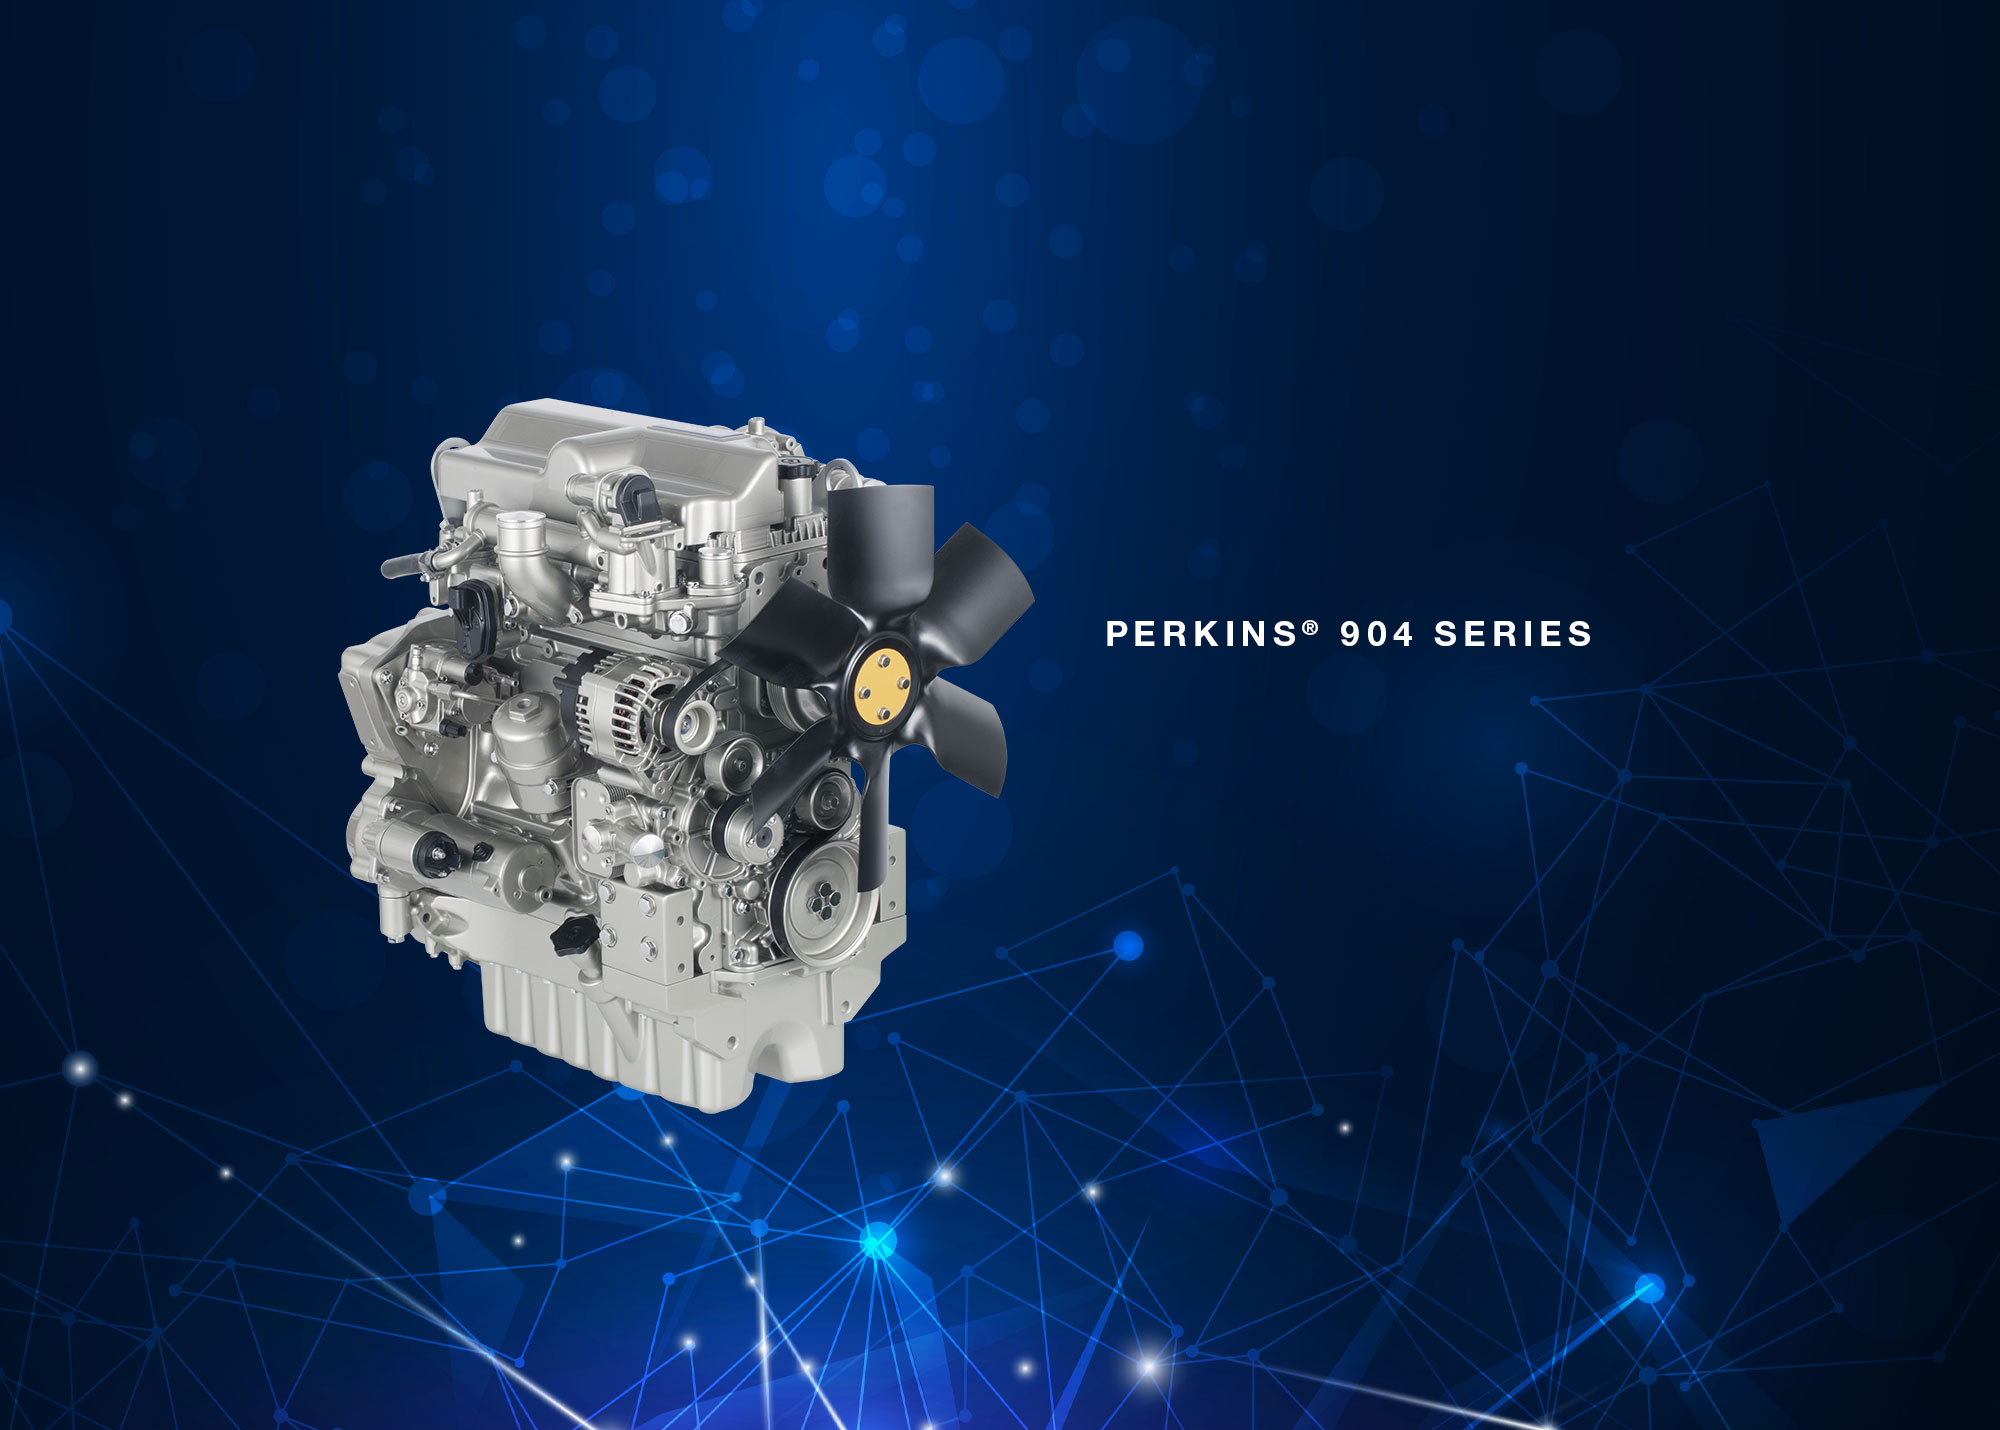 Engine of the hour – Perkins® 904 Series